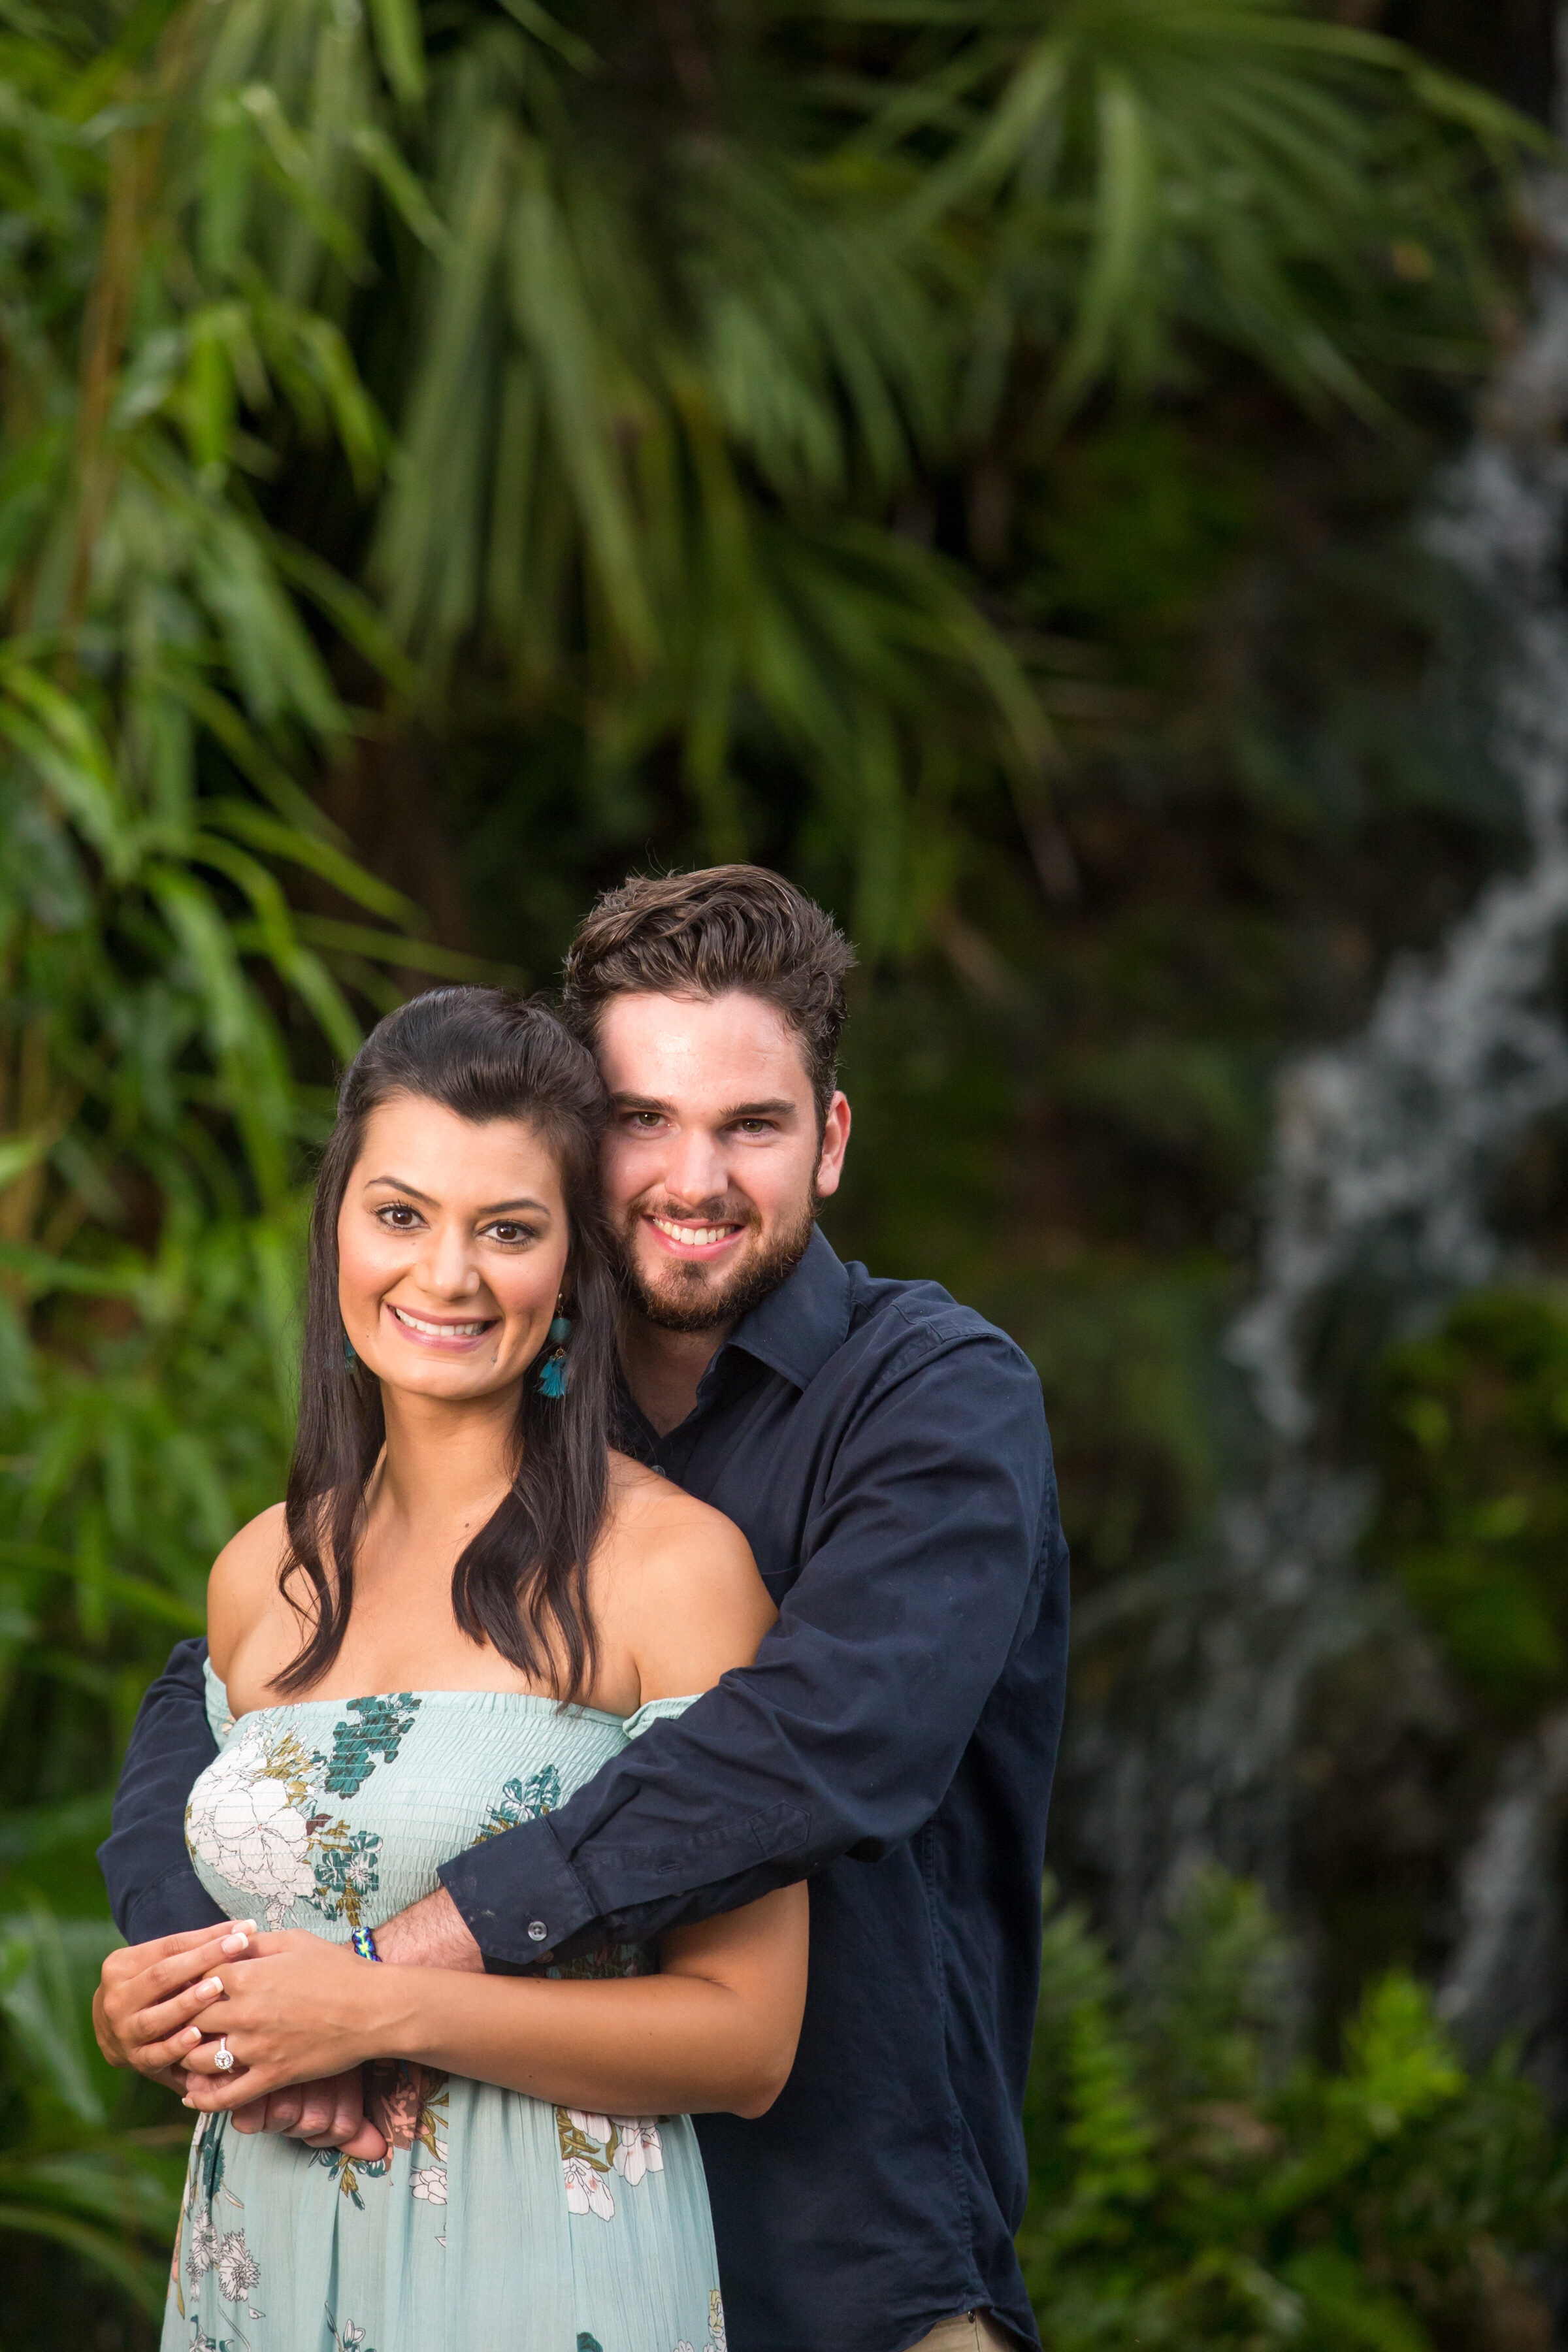 Ormond Beach engagement photography in the garden